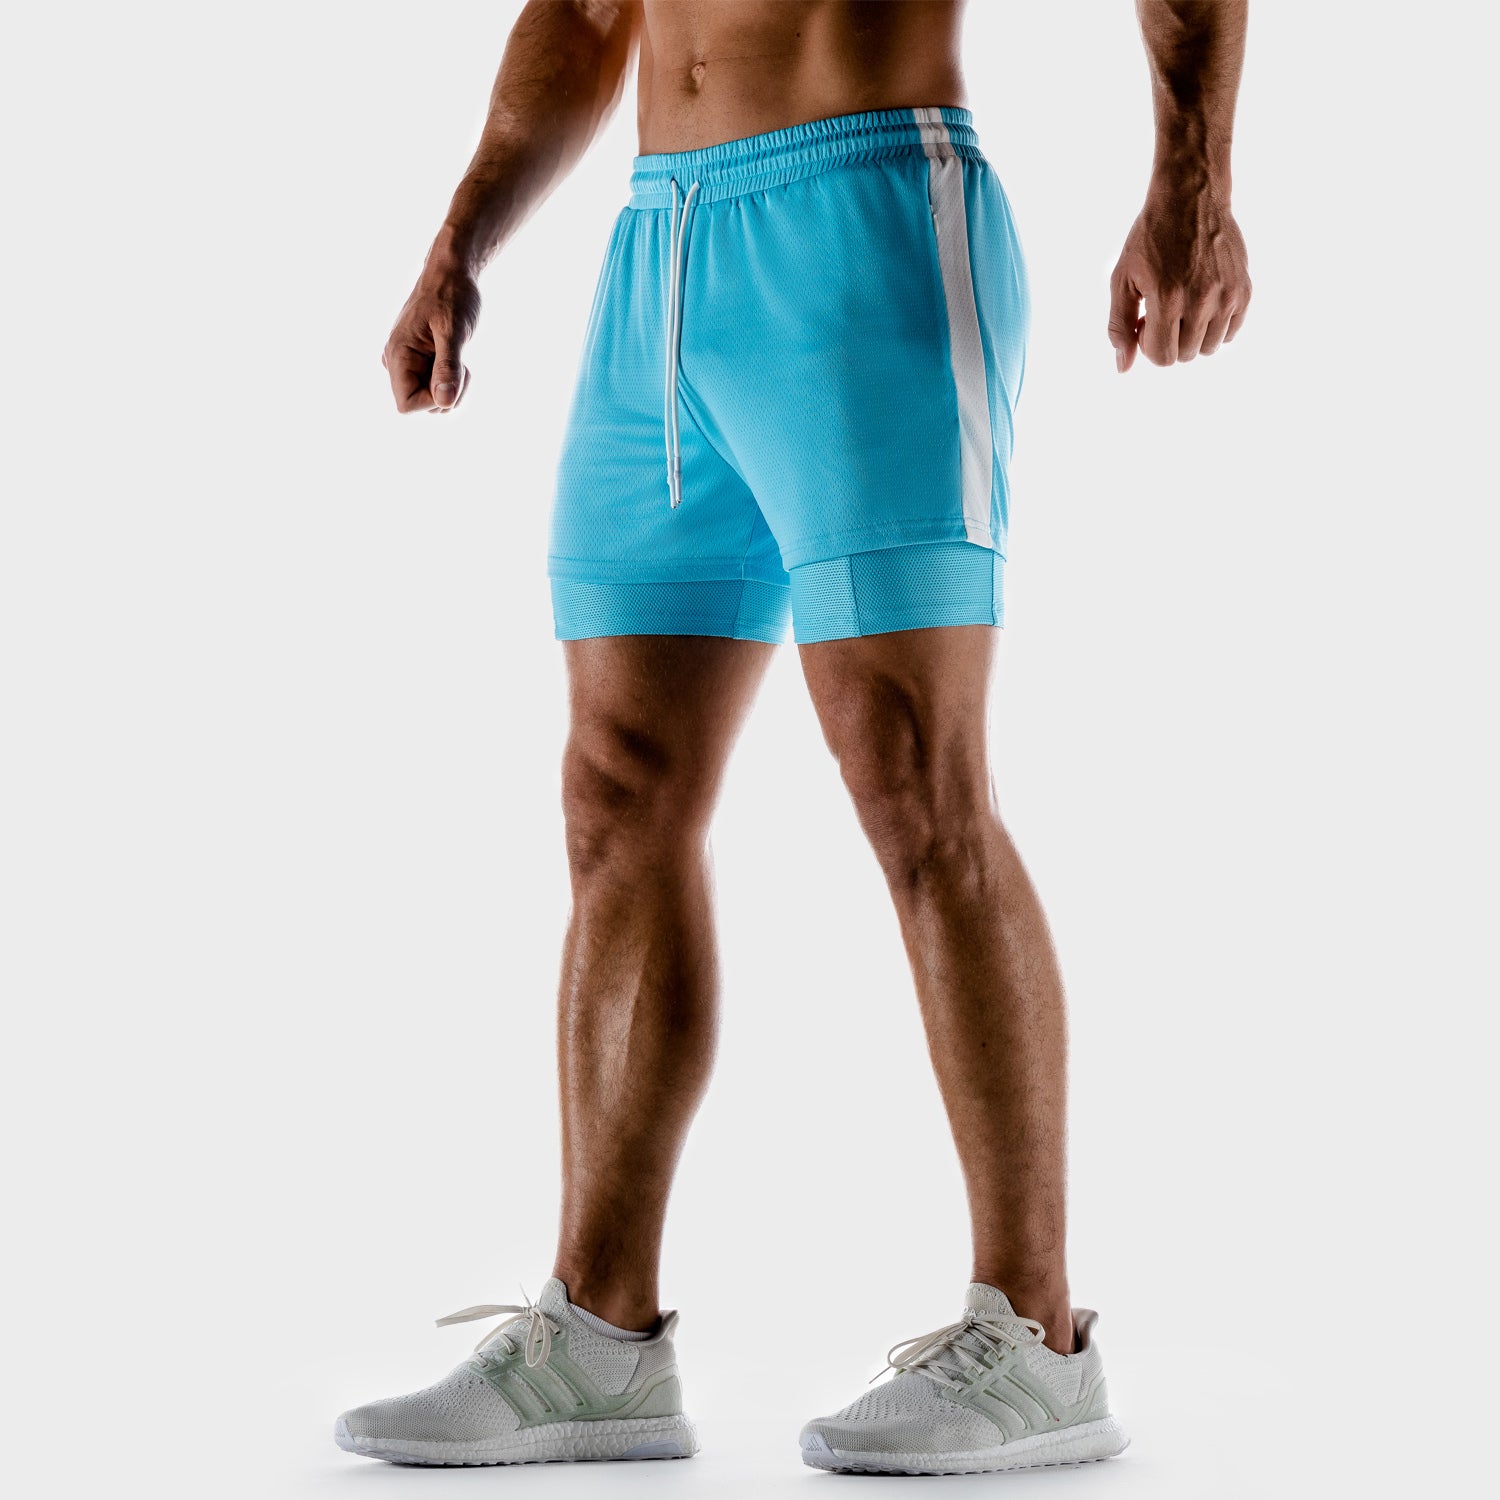 squatwolf-gym-wear-hybrid-performance-2-in-1-shorts-blue-workout-shorts-for-men